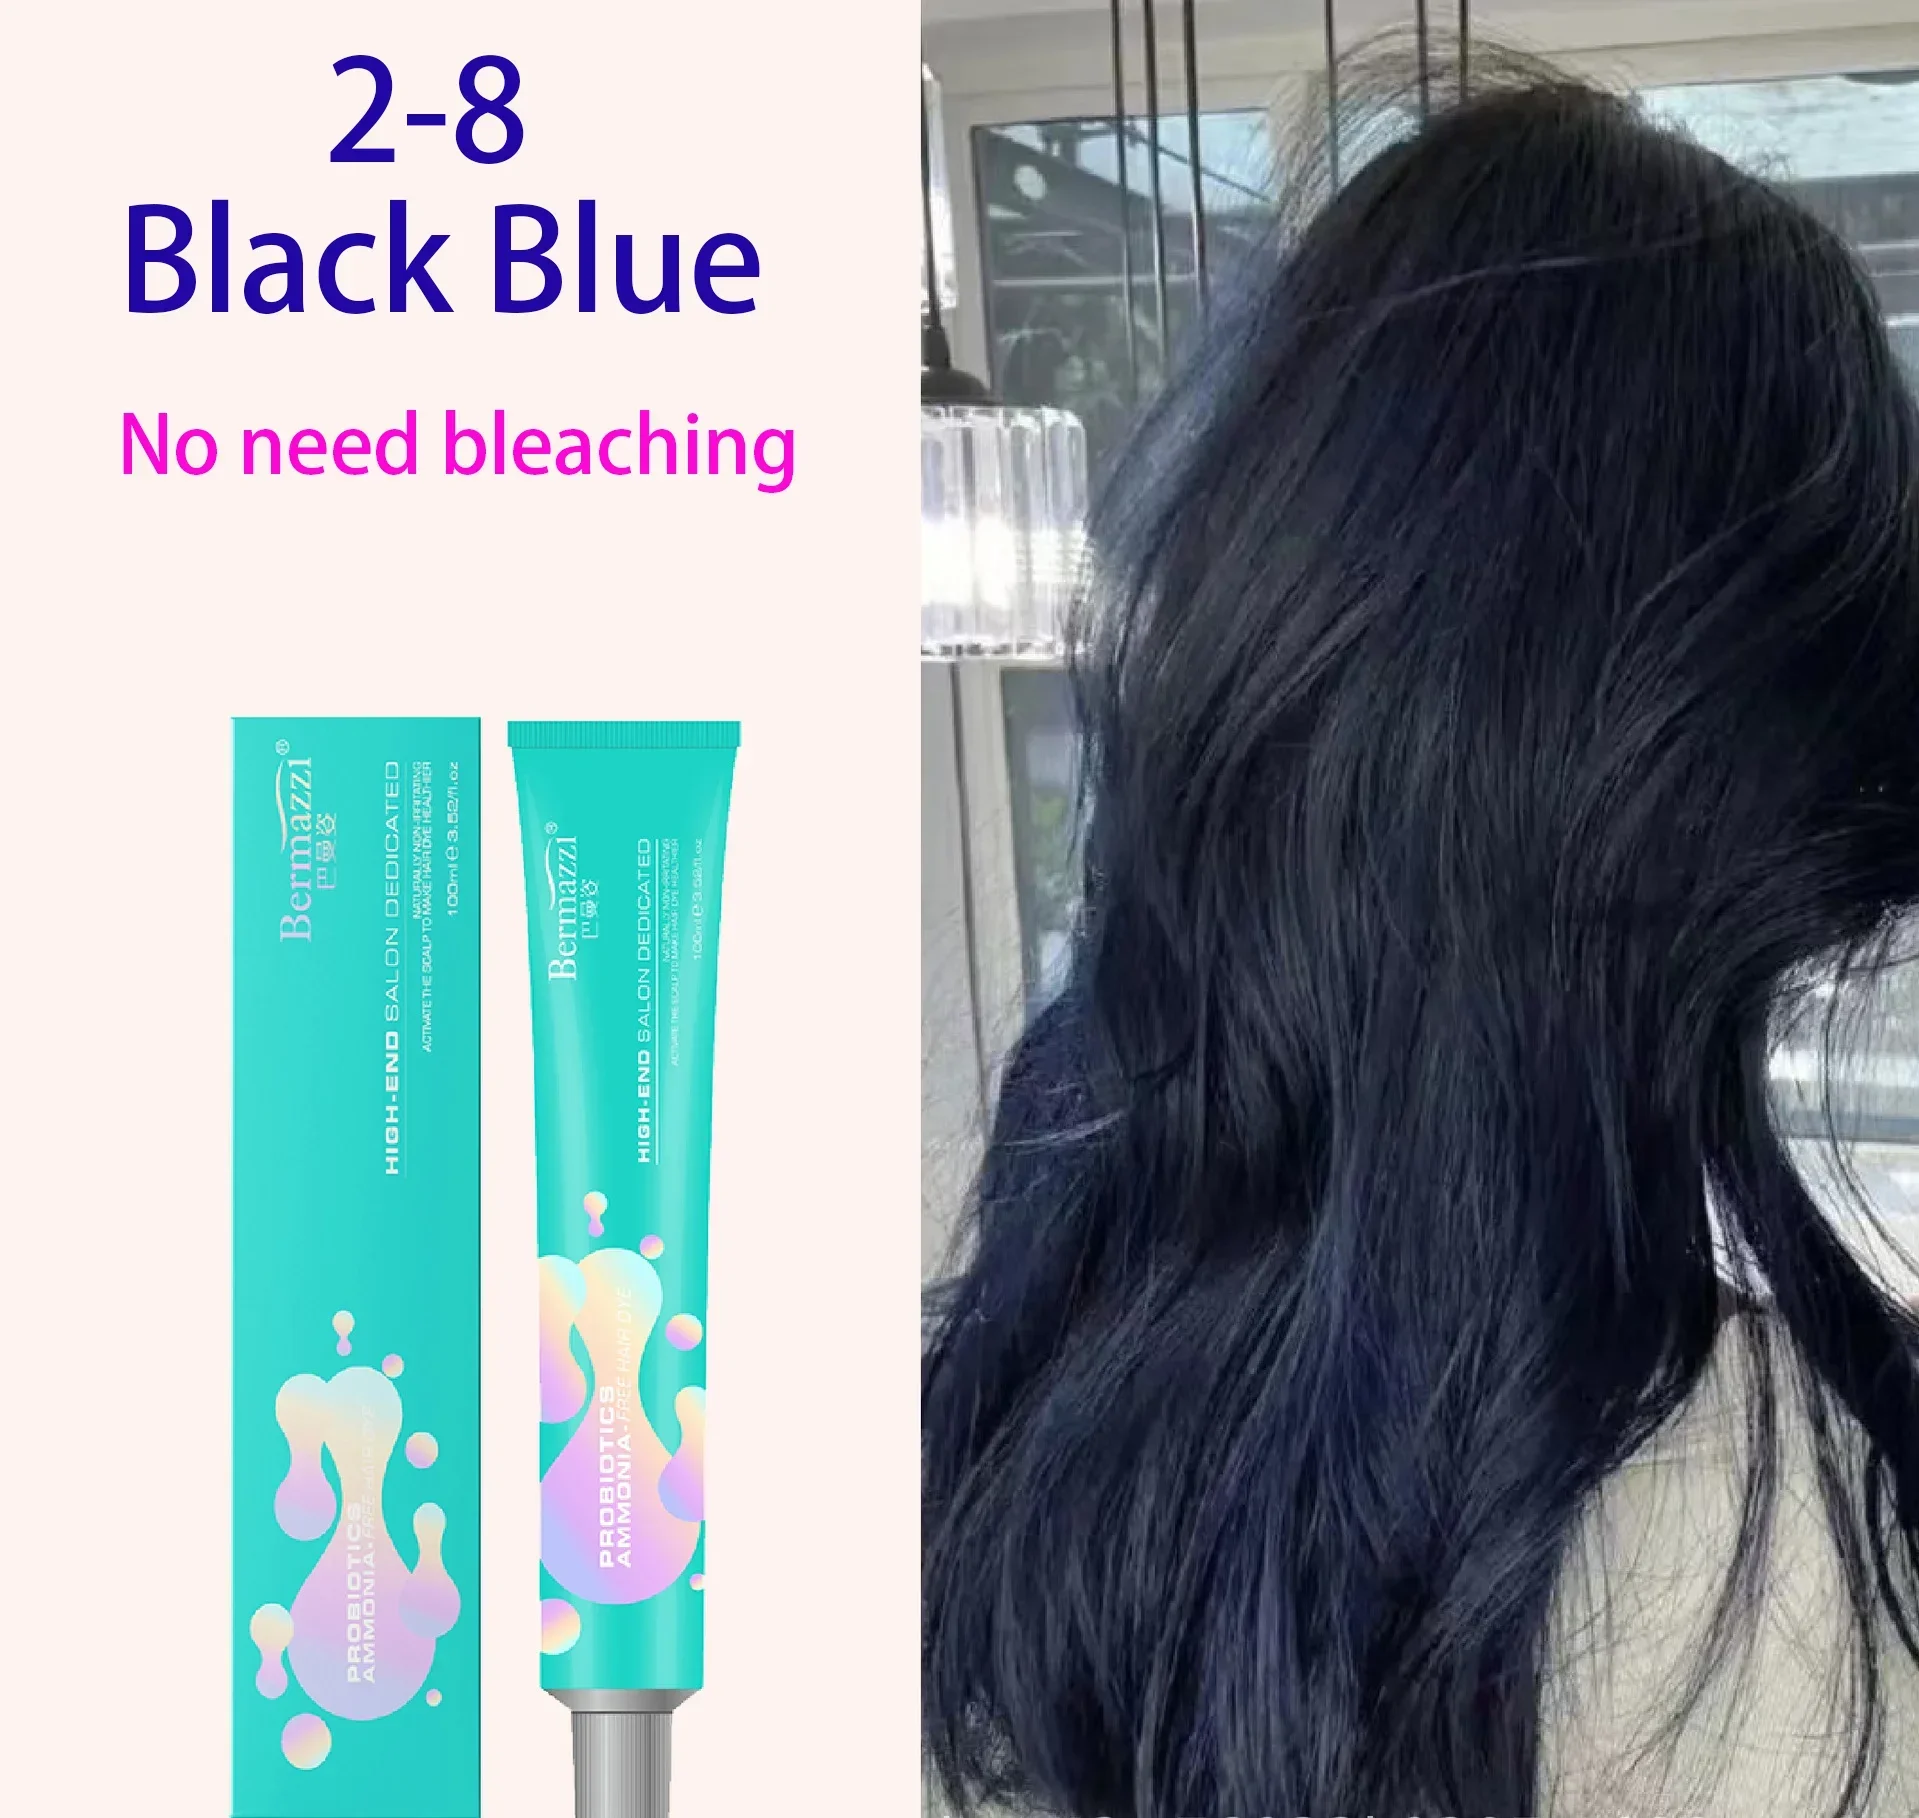 100ml Ammonia Free Plant Extracts Hair Paints Hair Dye Cream  Blue Black Permanent Fashion Hair Coloring Pigment high quality diffusion portable ammonia detection alarm nh3 gas detector